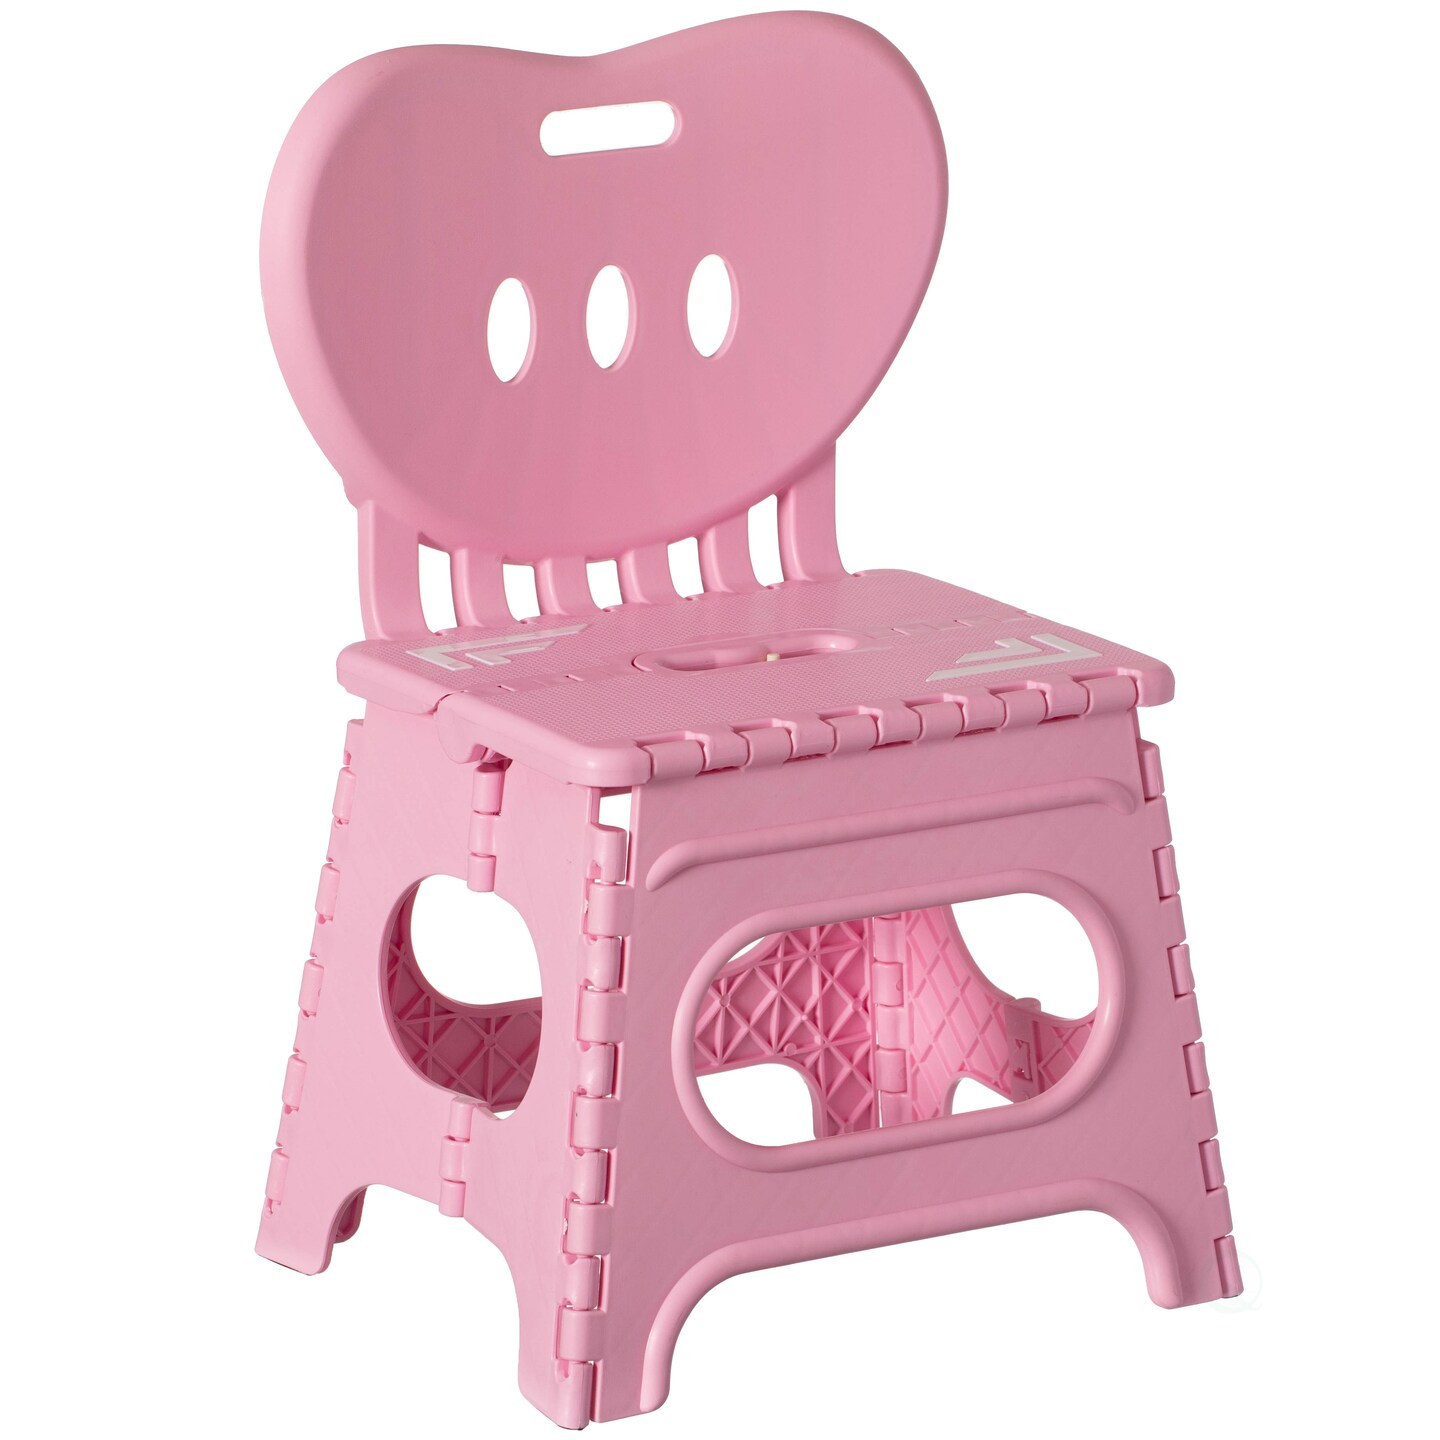 Plastic Foldable Step Stool with Back Support, Heart Shaped Backrest, Portable Chair with Handle, Kids Stepping Stool and Bathroom Stool, Collapsible Step Stool